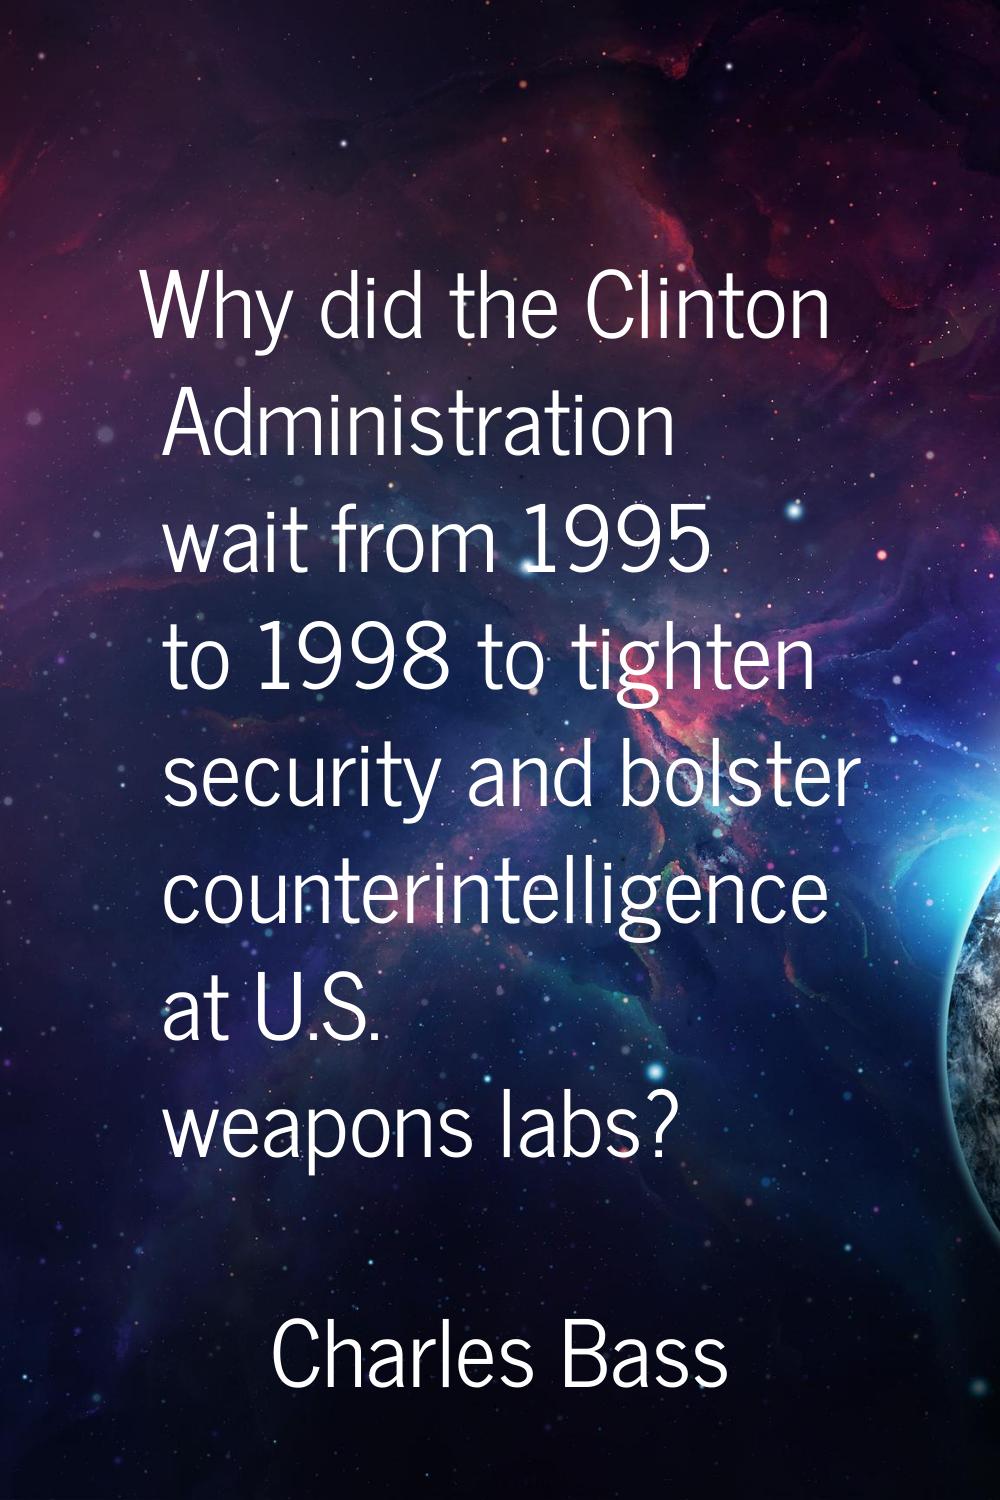 Why did the Clinton Administration wait from 1995 to 1998 to tighten security and bolster counterin